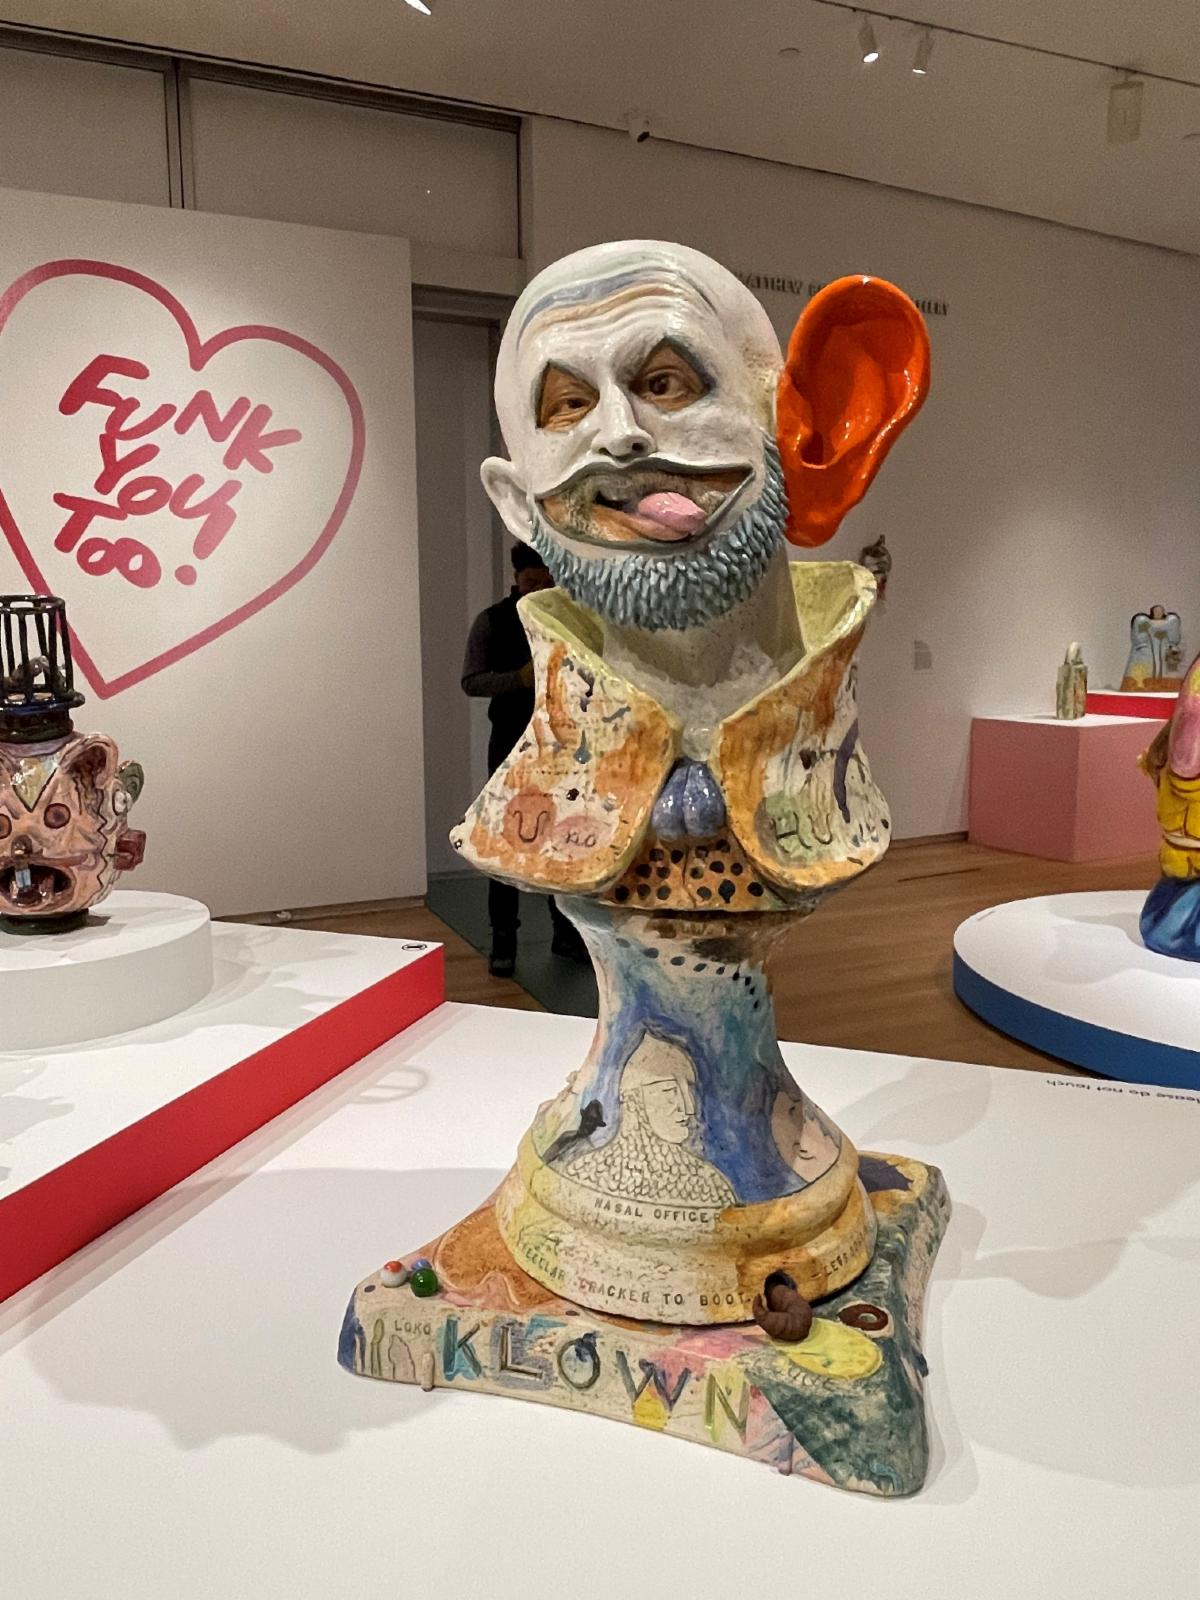 Funk You Too! Humor and Irreverence in Ceramic Sculpture